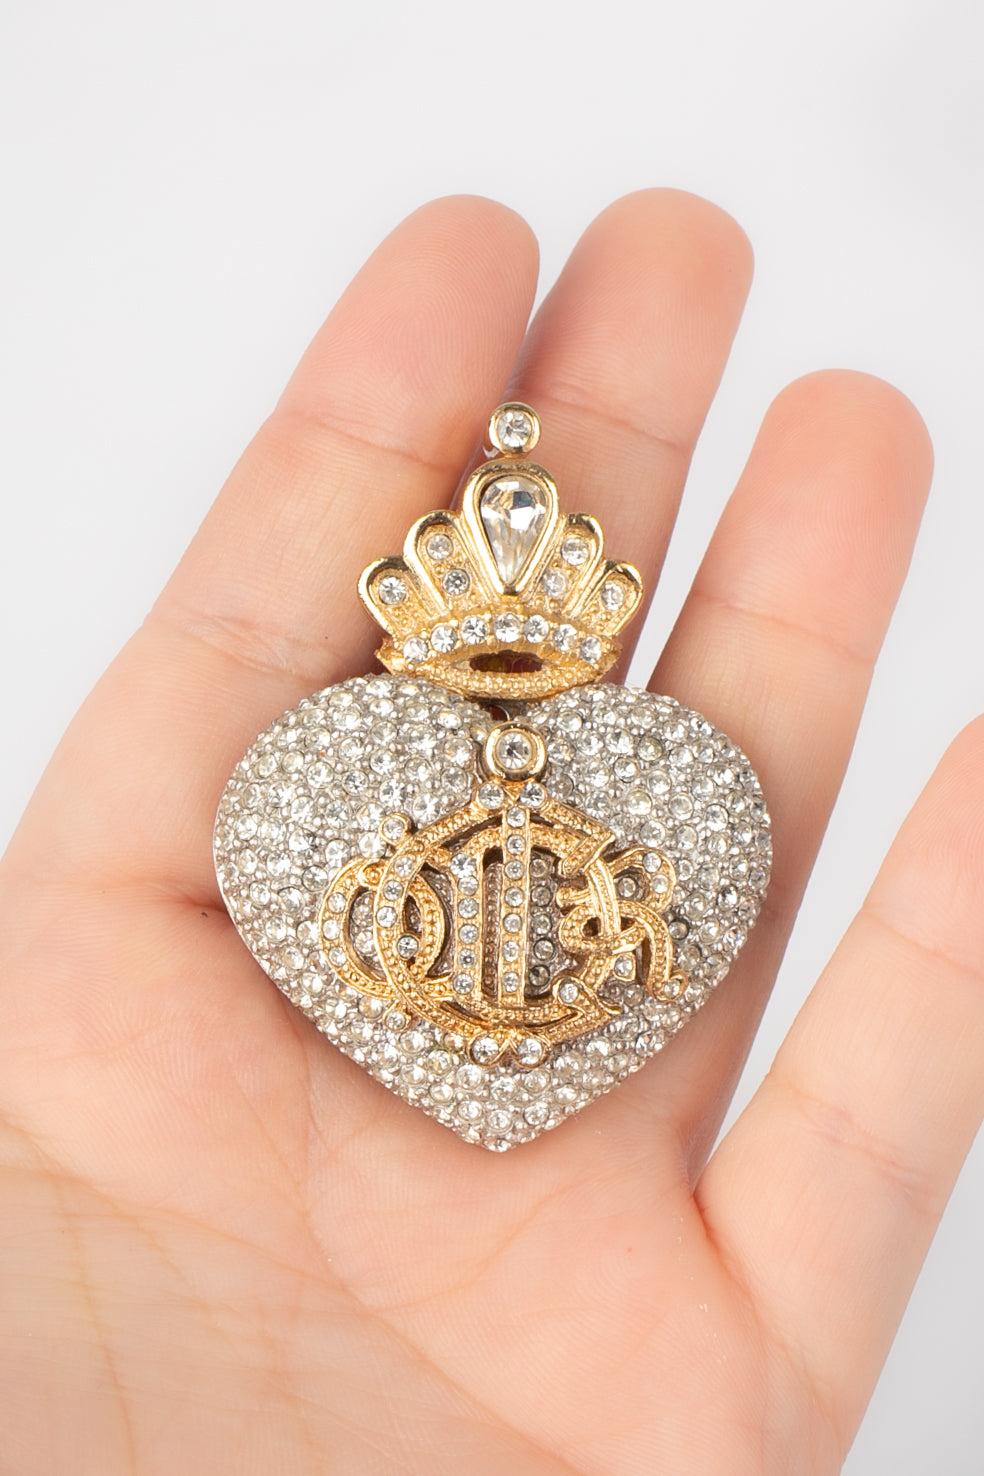 Dior - (Made in France) Silvery and golden metal brooch representing a heart topped with a crown and entirely ornamented with rhinestones.
 
 Additional information: 
 Condition: Very good condition
 Dimensions: 5.5 cm x 4.5 cm
 
 Seller Reference: